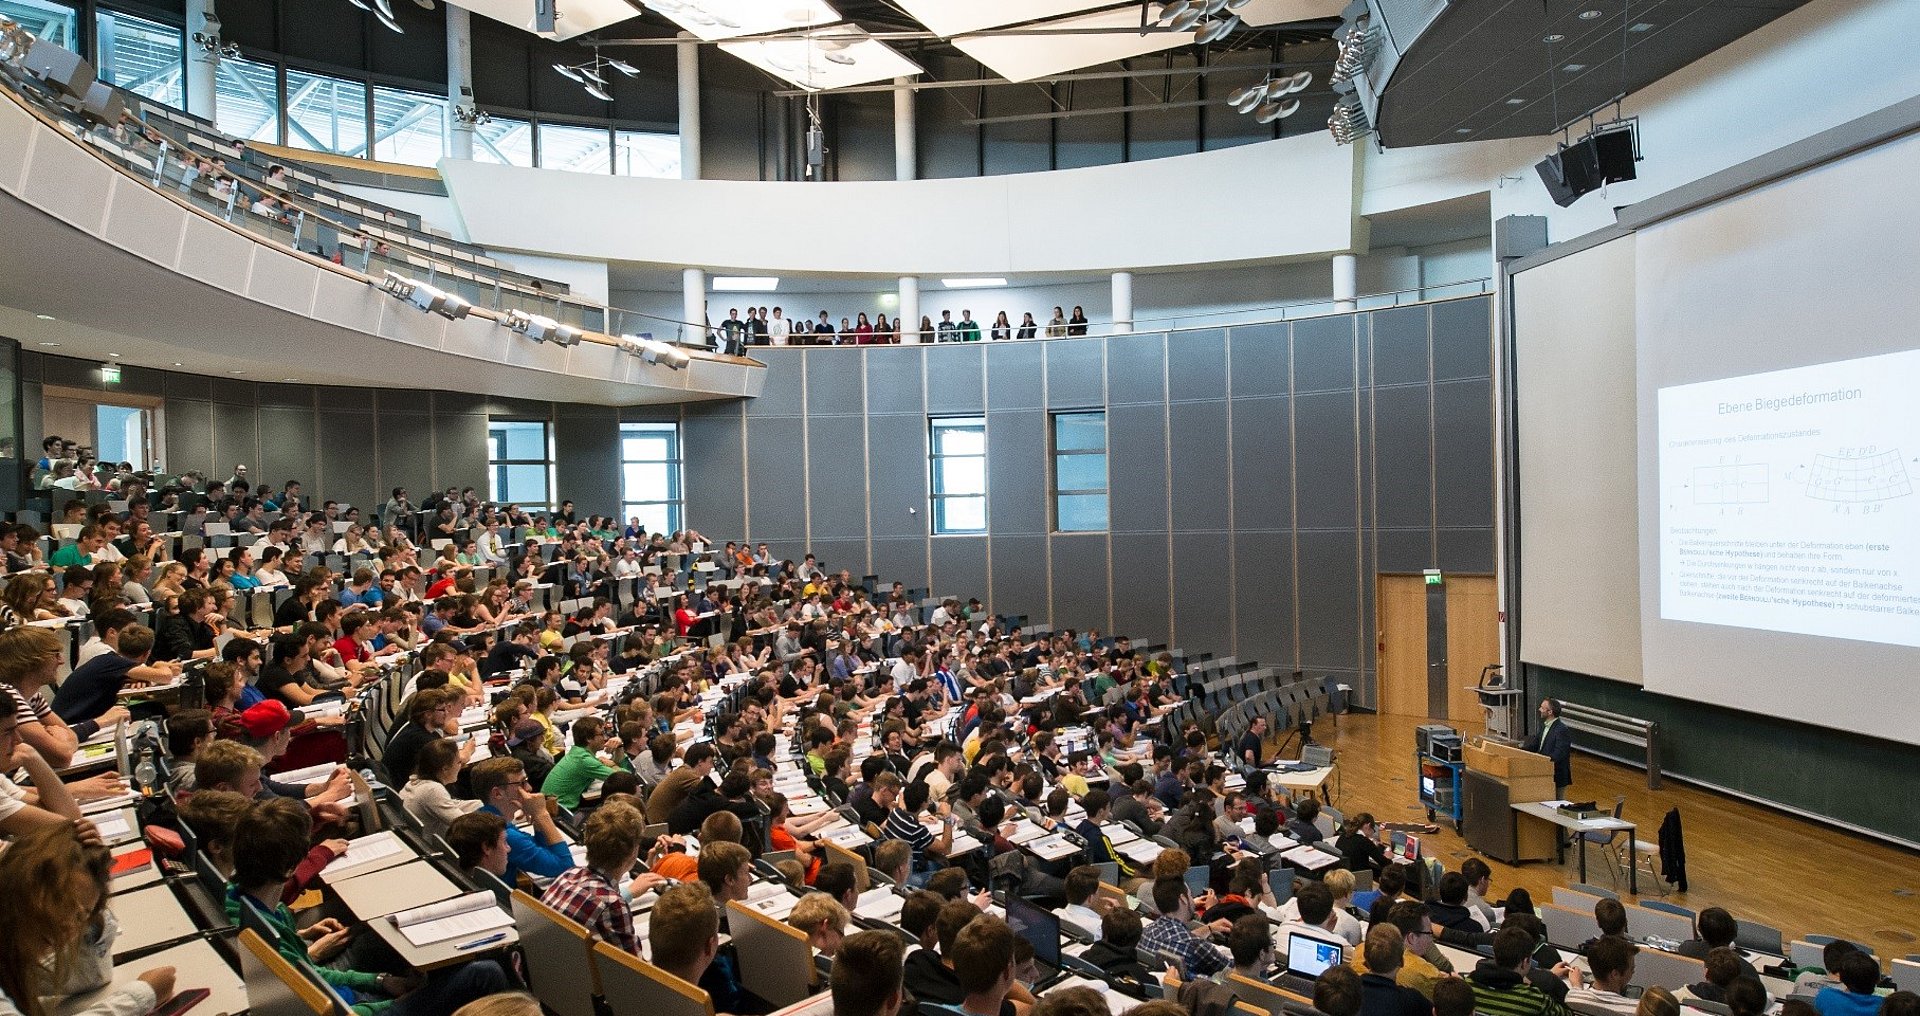 A full lecture hall during a presentation.